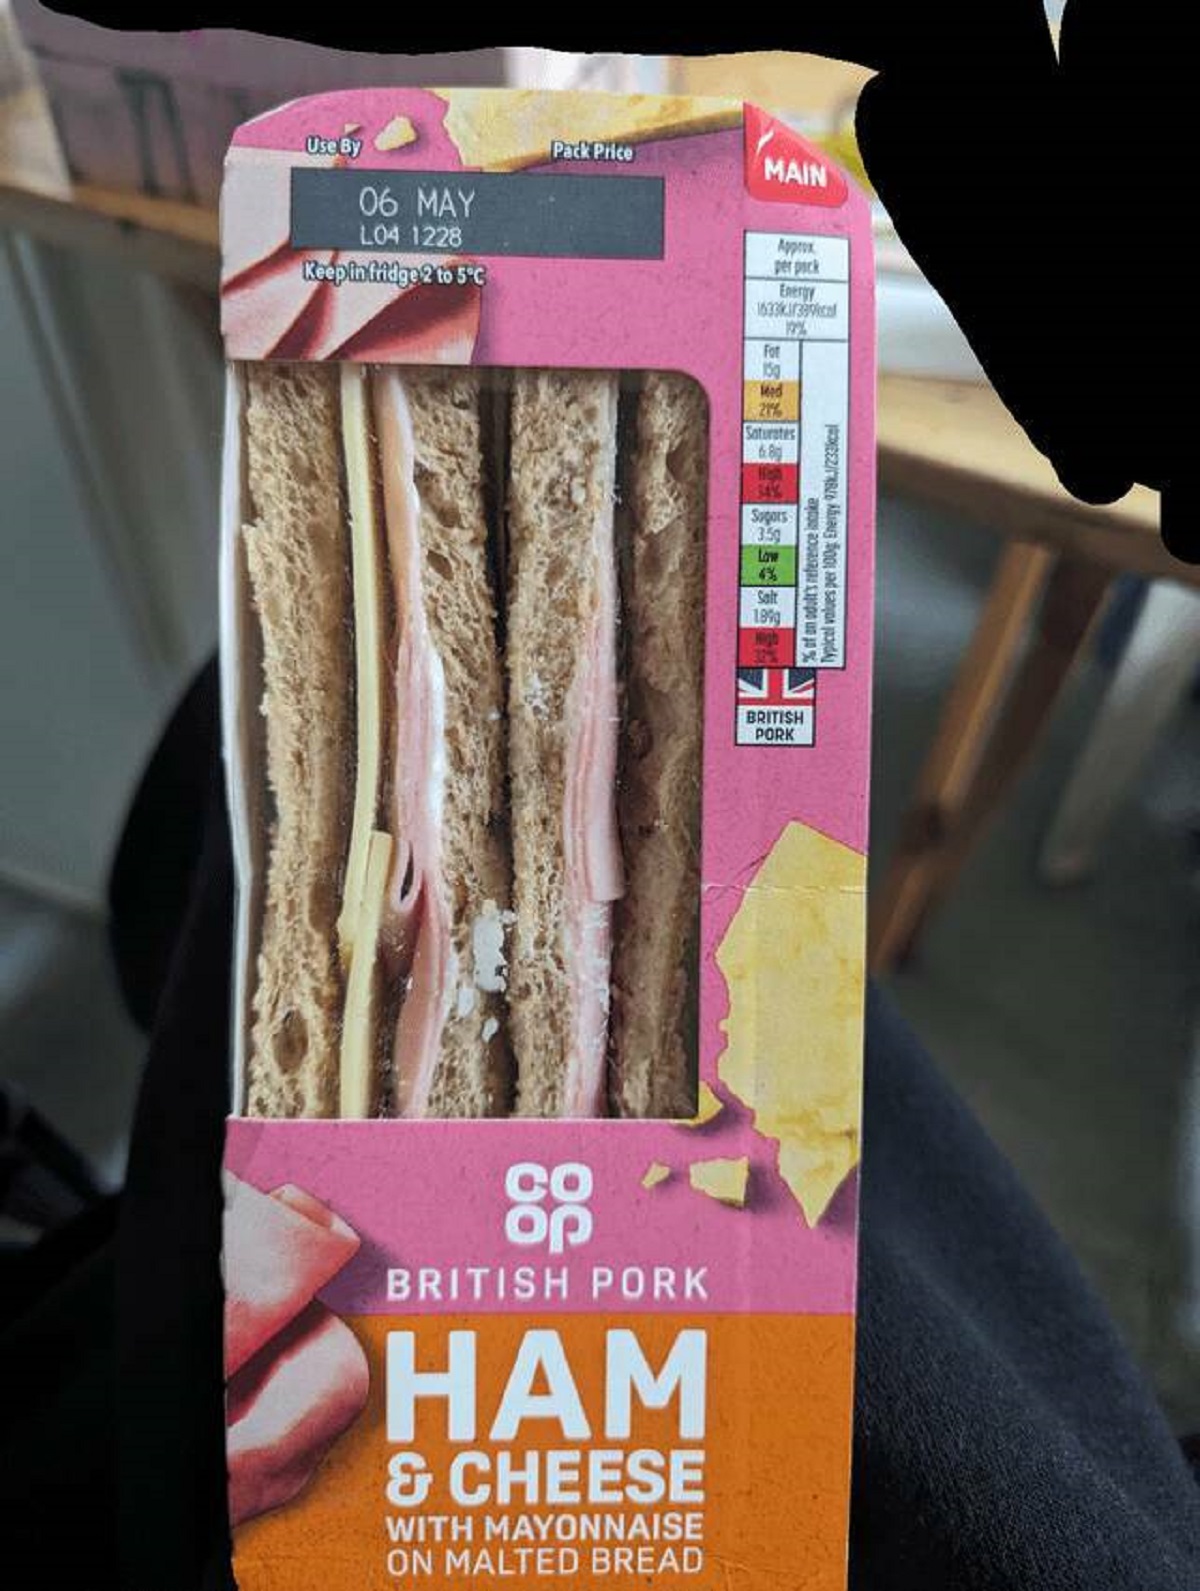 "Missing the cheese on half of my 'Ham and cheese' sandwich..."